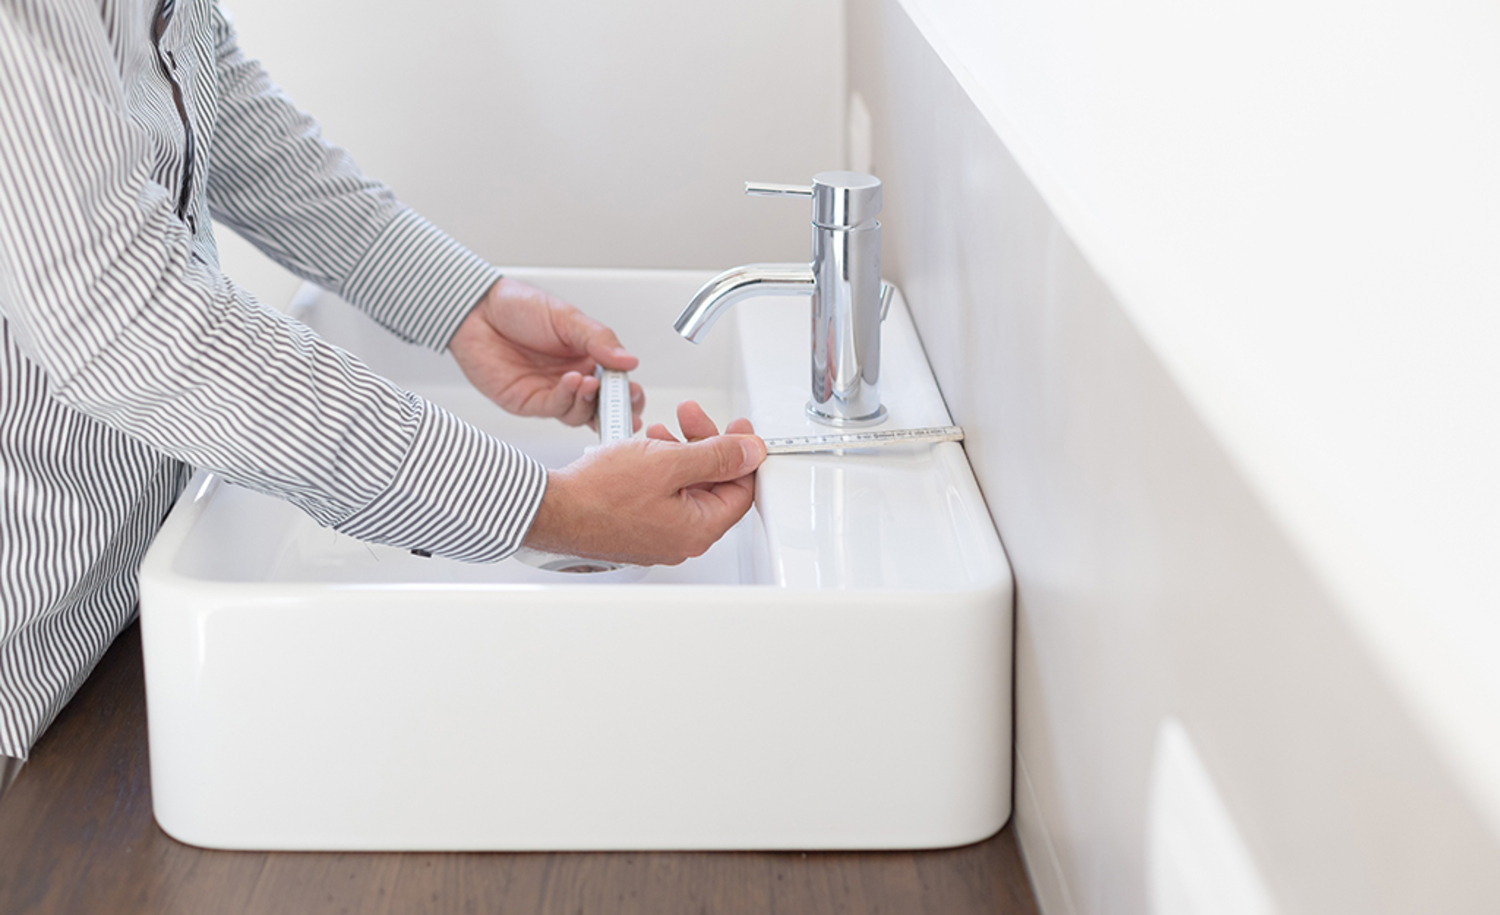 How To Measure For Bathroom Faucet